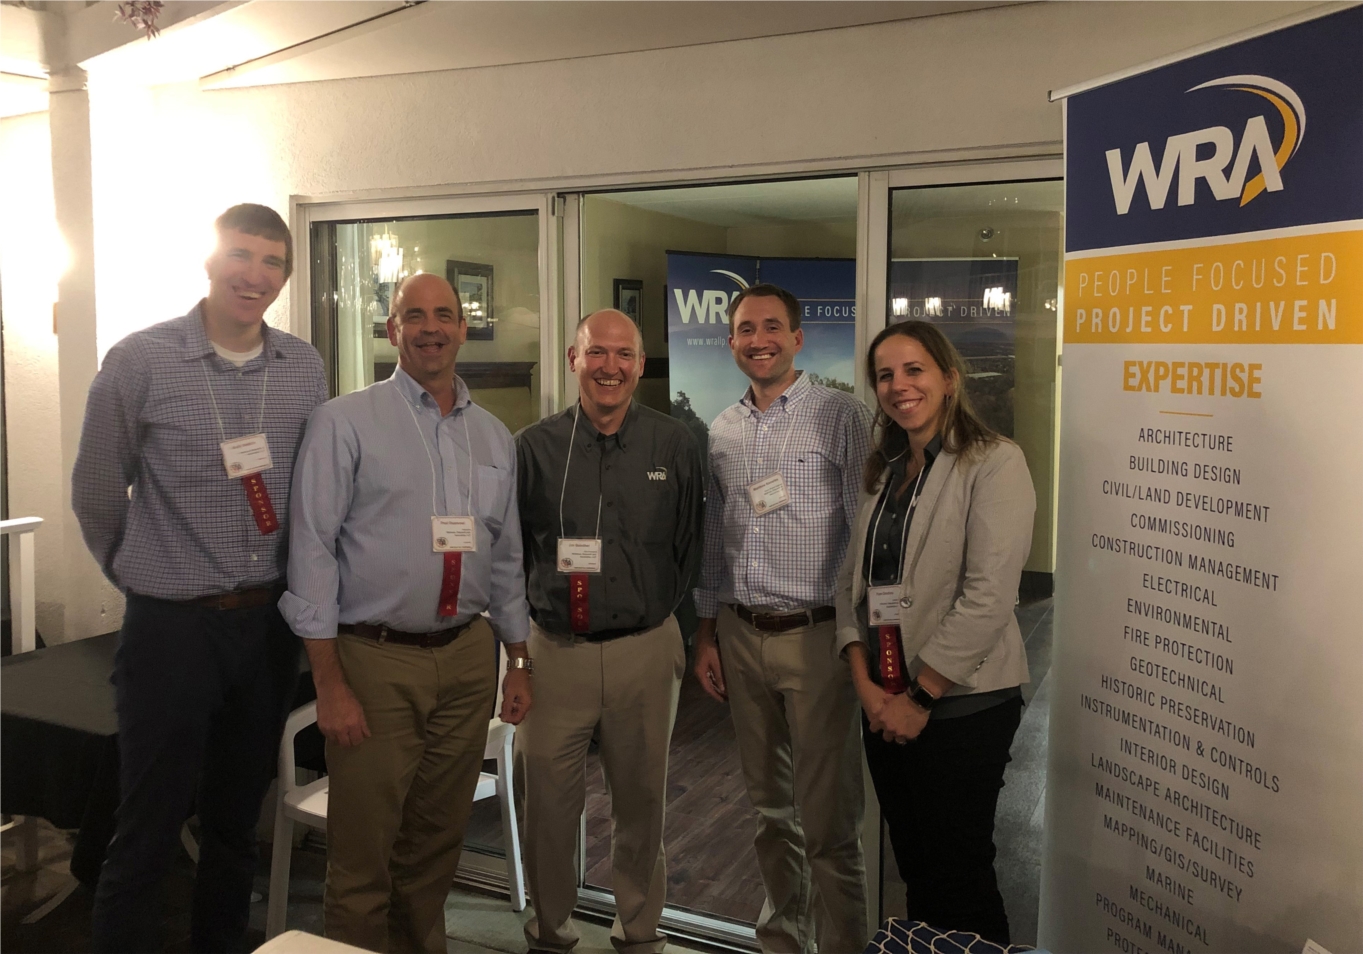 WRA employees at CEAM Conference